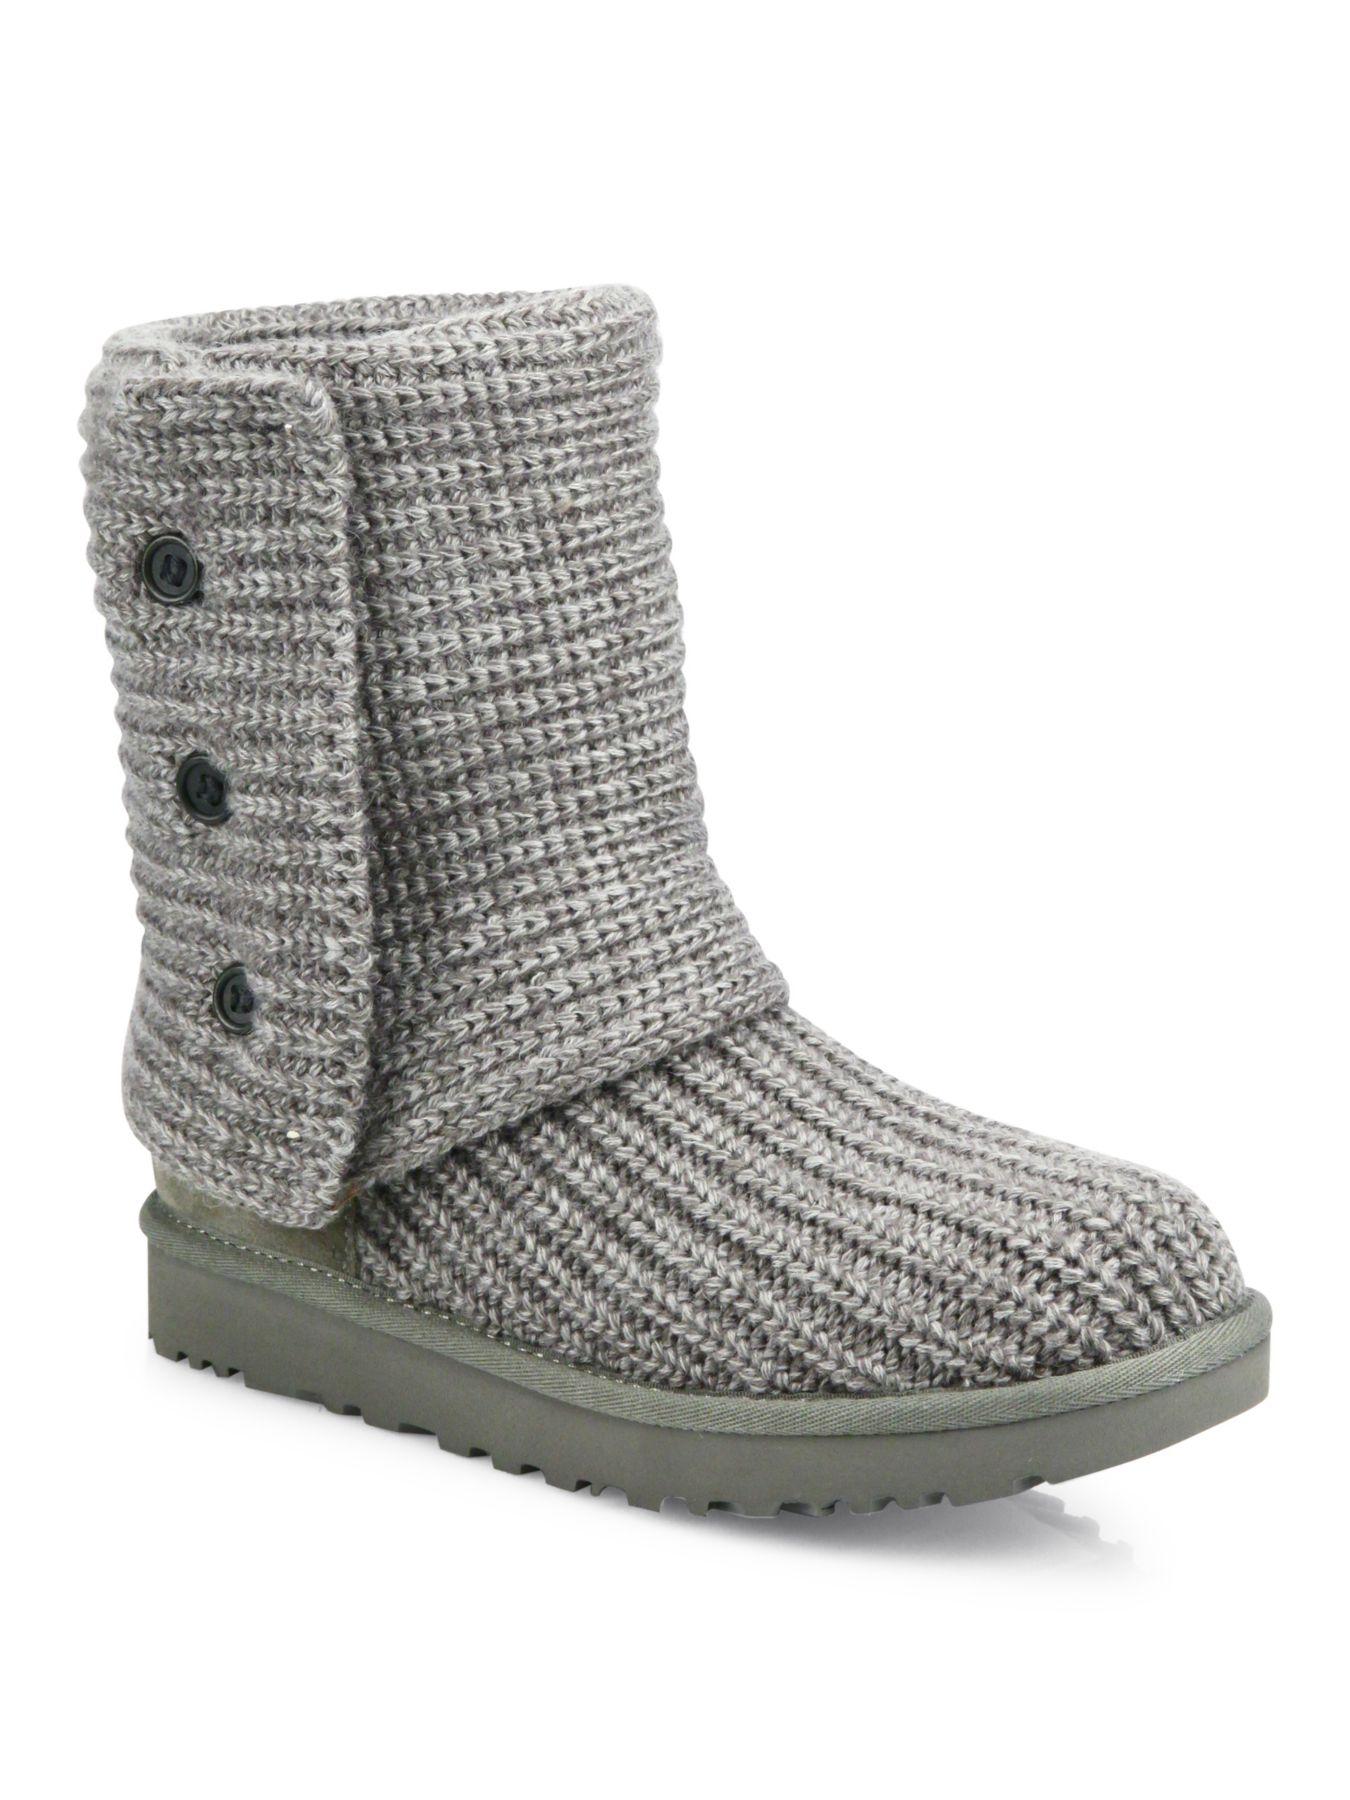 UGG Fur Classic Cardy Knit Boots in Grey (Gray) - Lyst